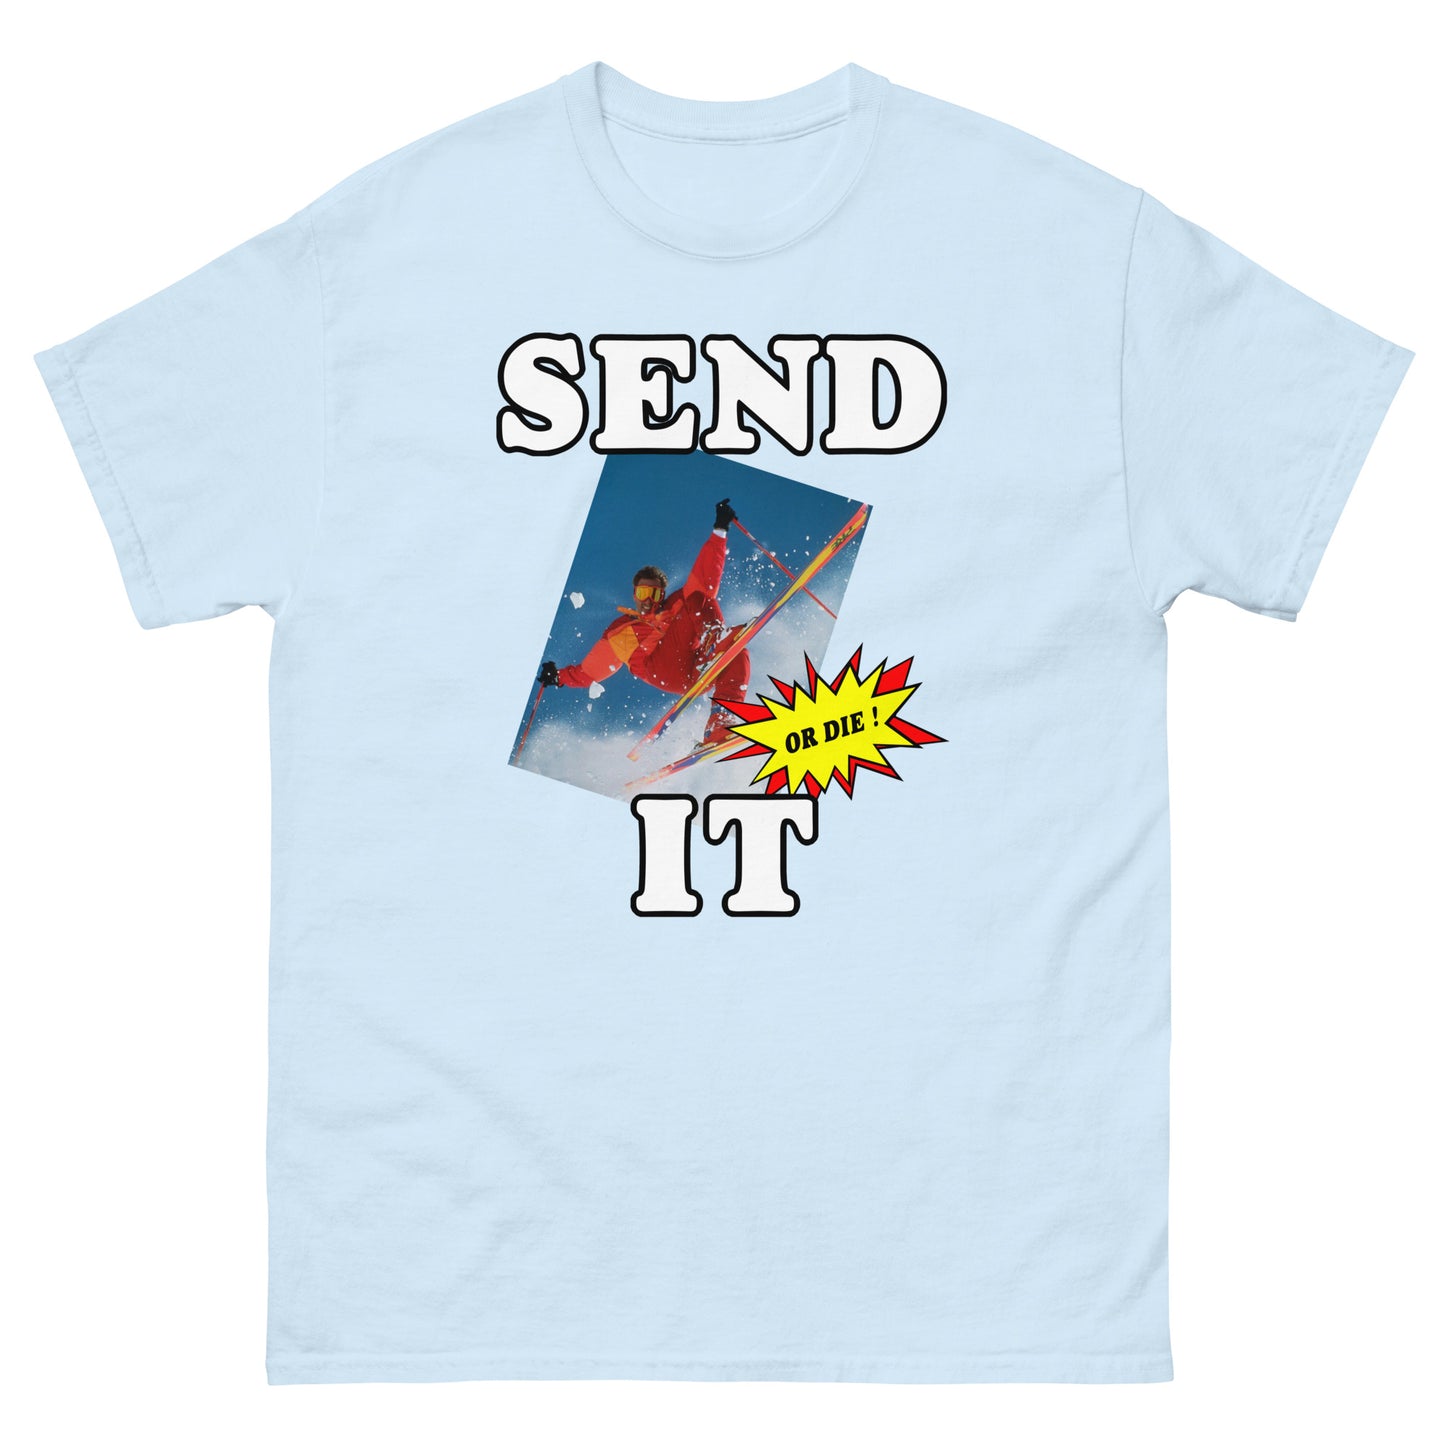 Send it or die extreme skier printed t-shirt by Whistler Shirts